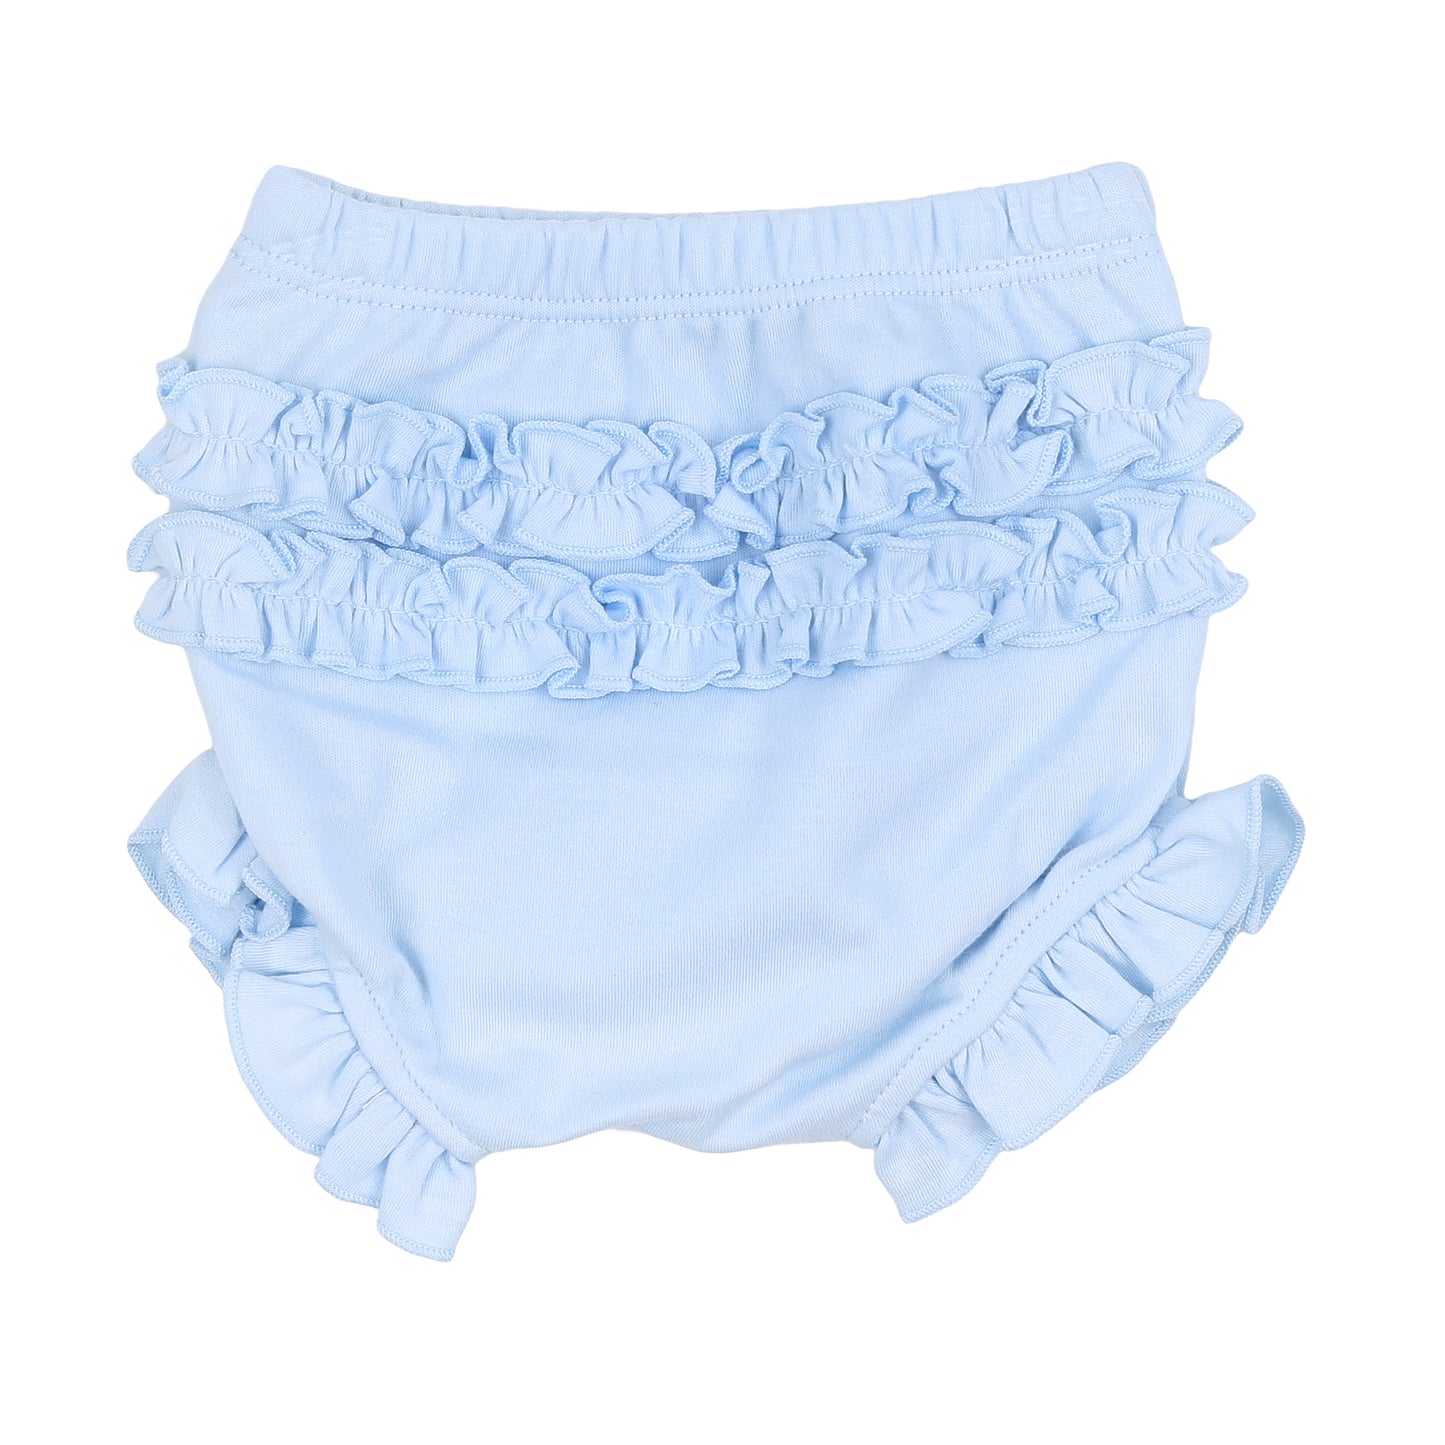 Hailey and Harry Smocked Collared Ruffle Diaper Cover Set